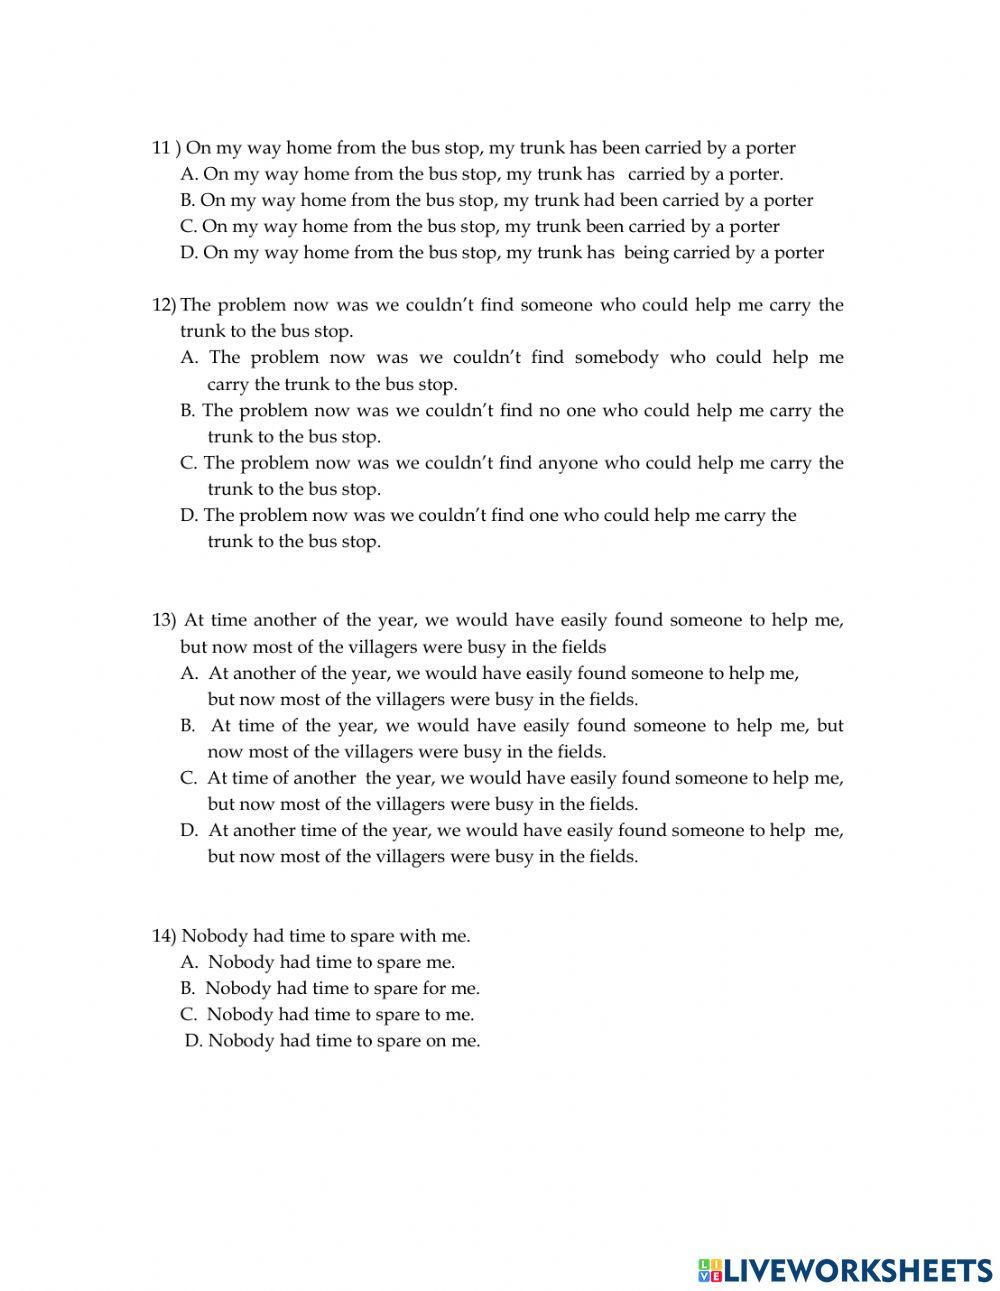 Class X: worksheet 8 in unit-3 Reading.A